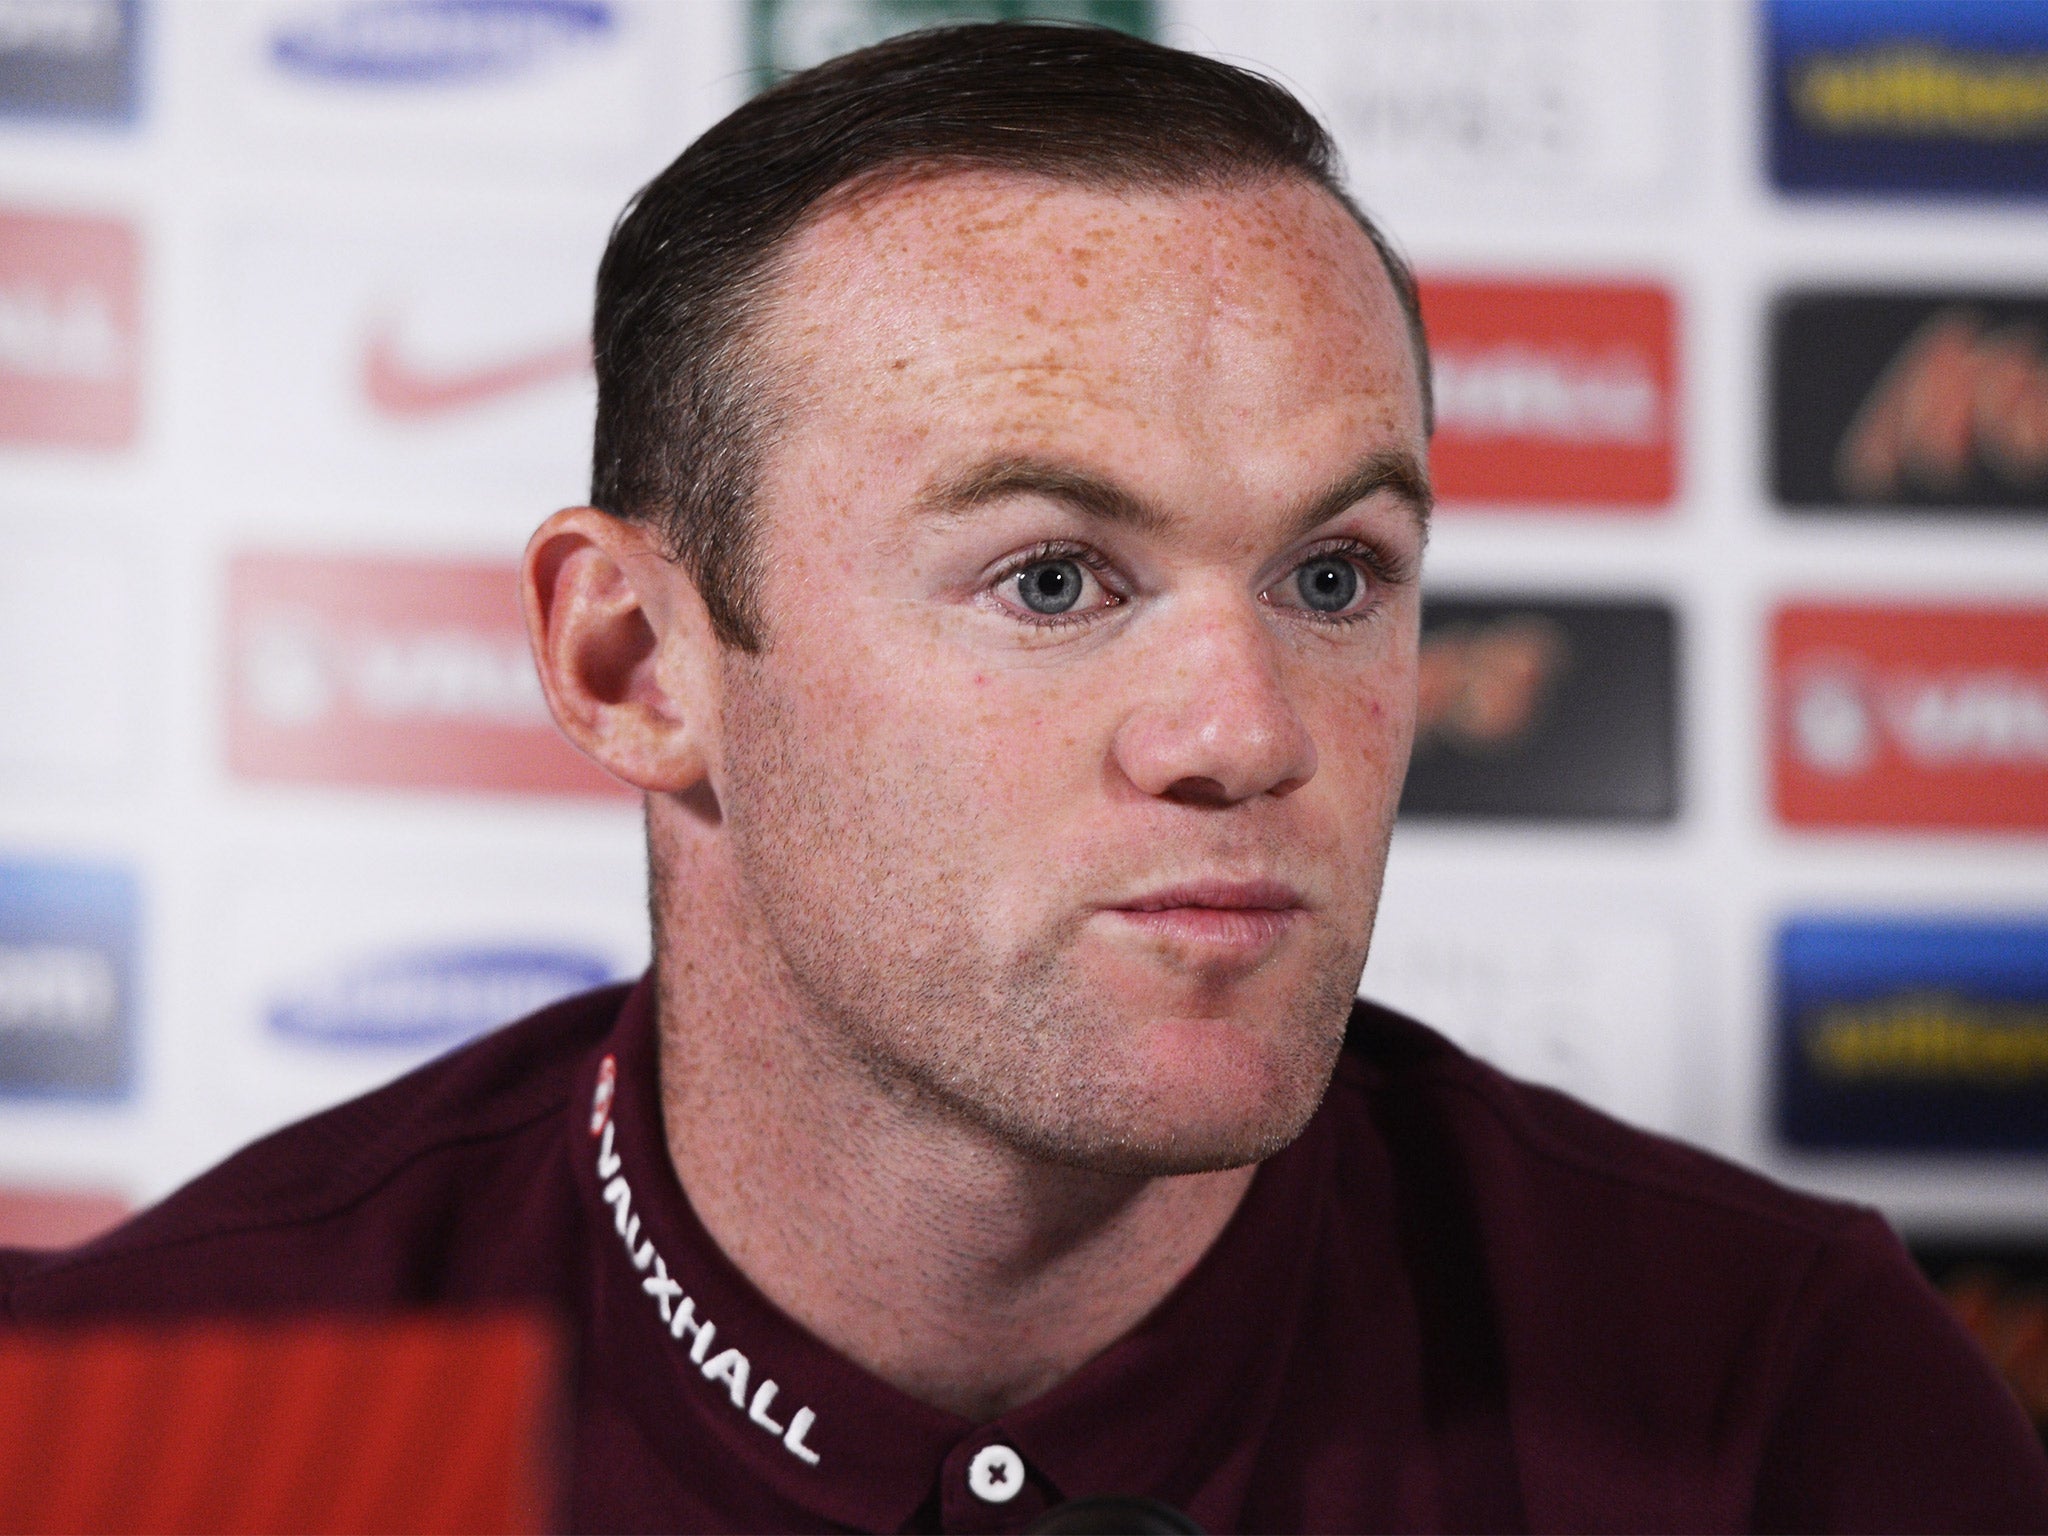 Captain Rooney: 'I’ve made errors in the past. You progress with age. I feel I’m in a comfortable position now'